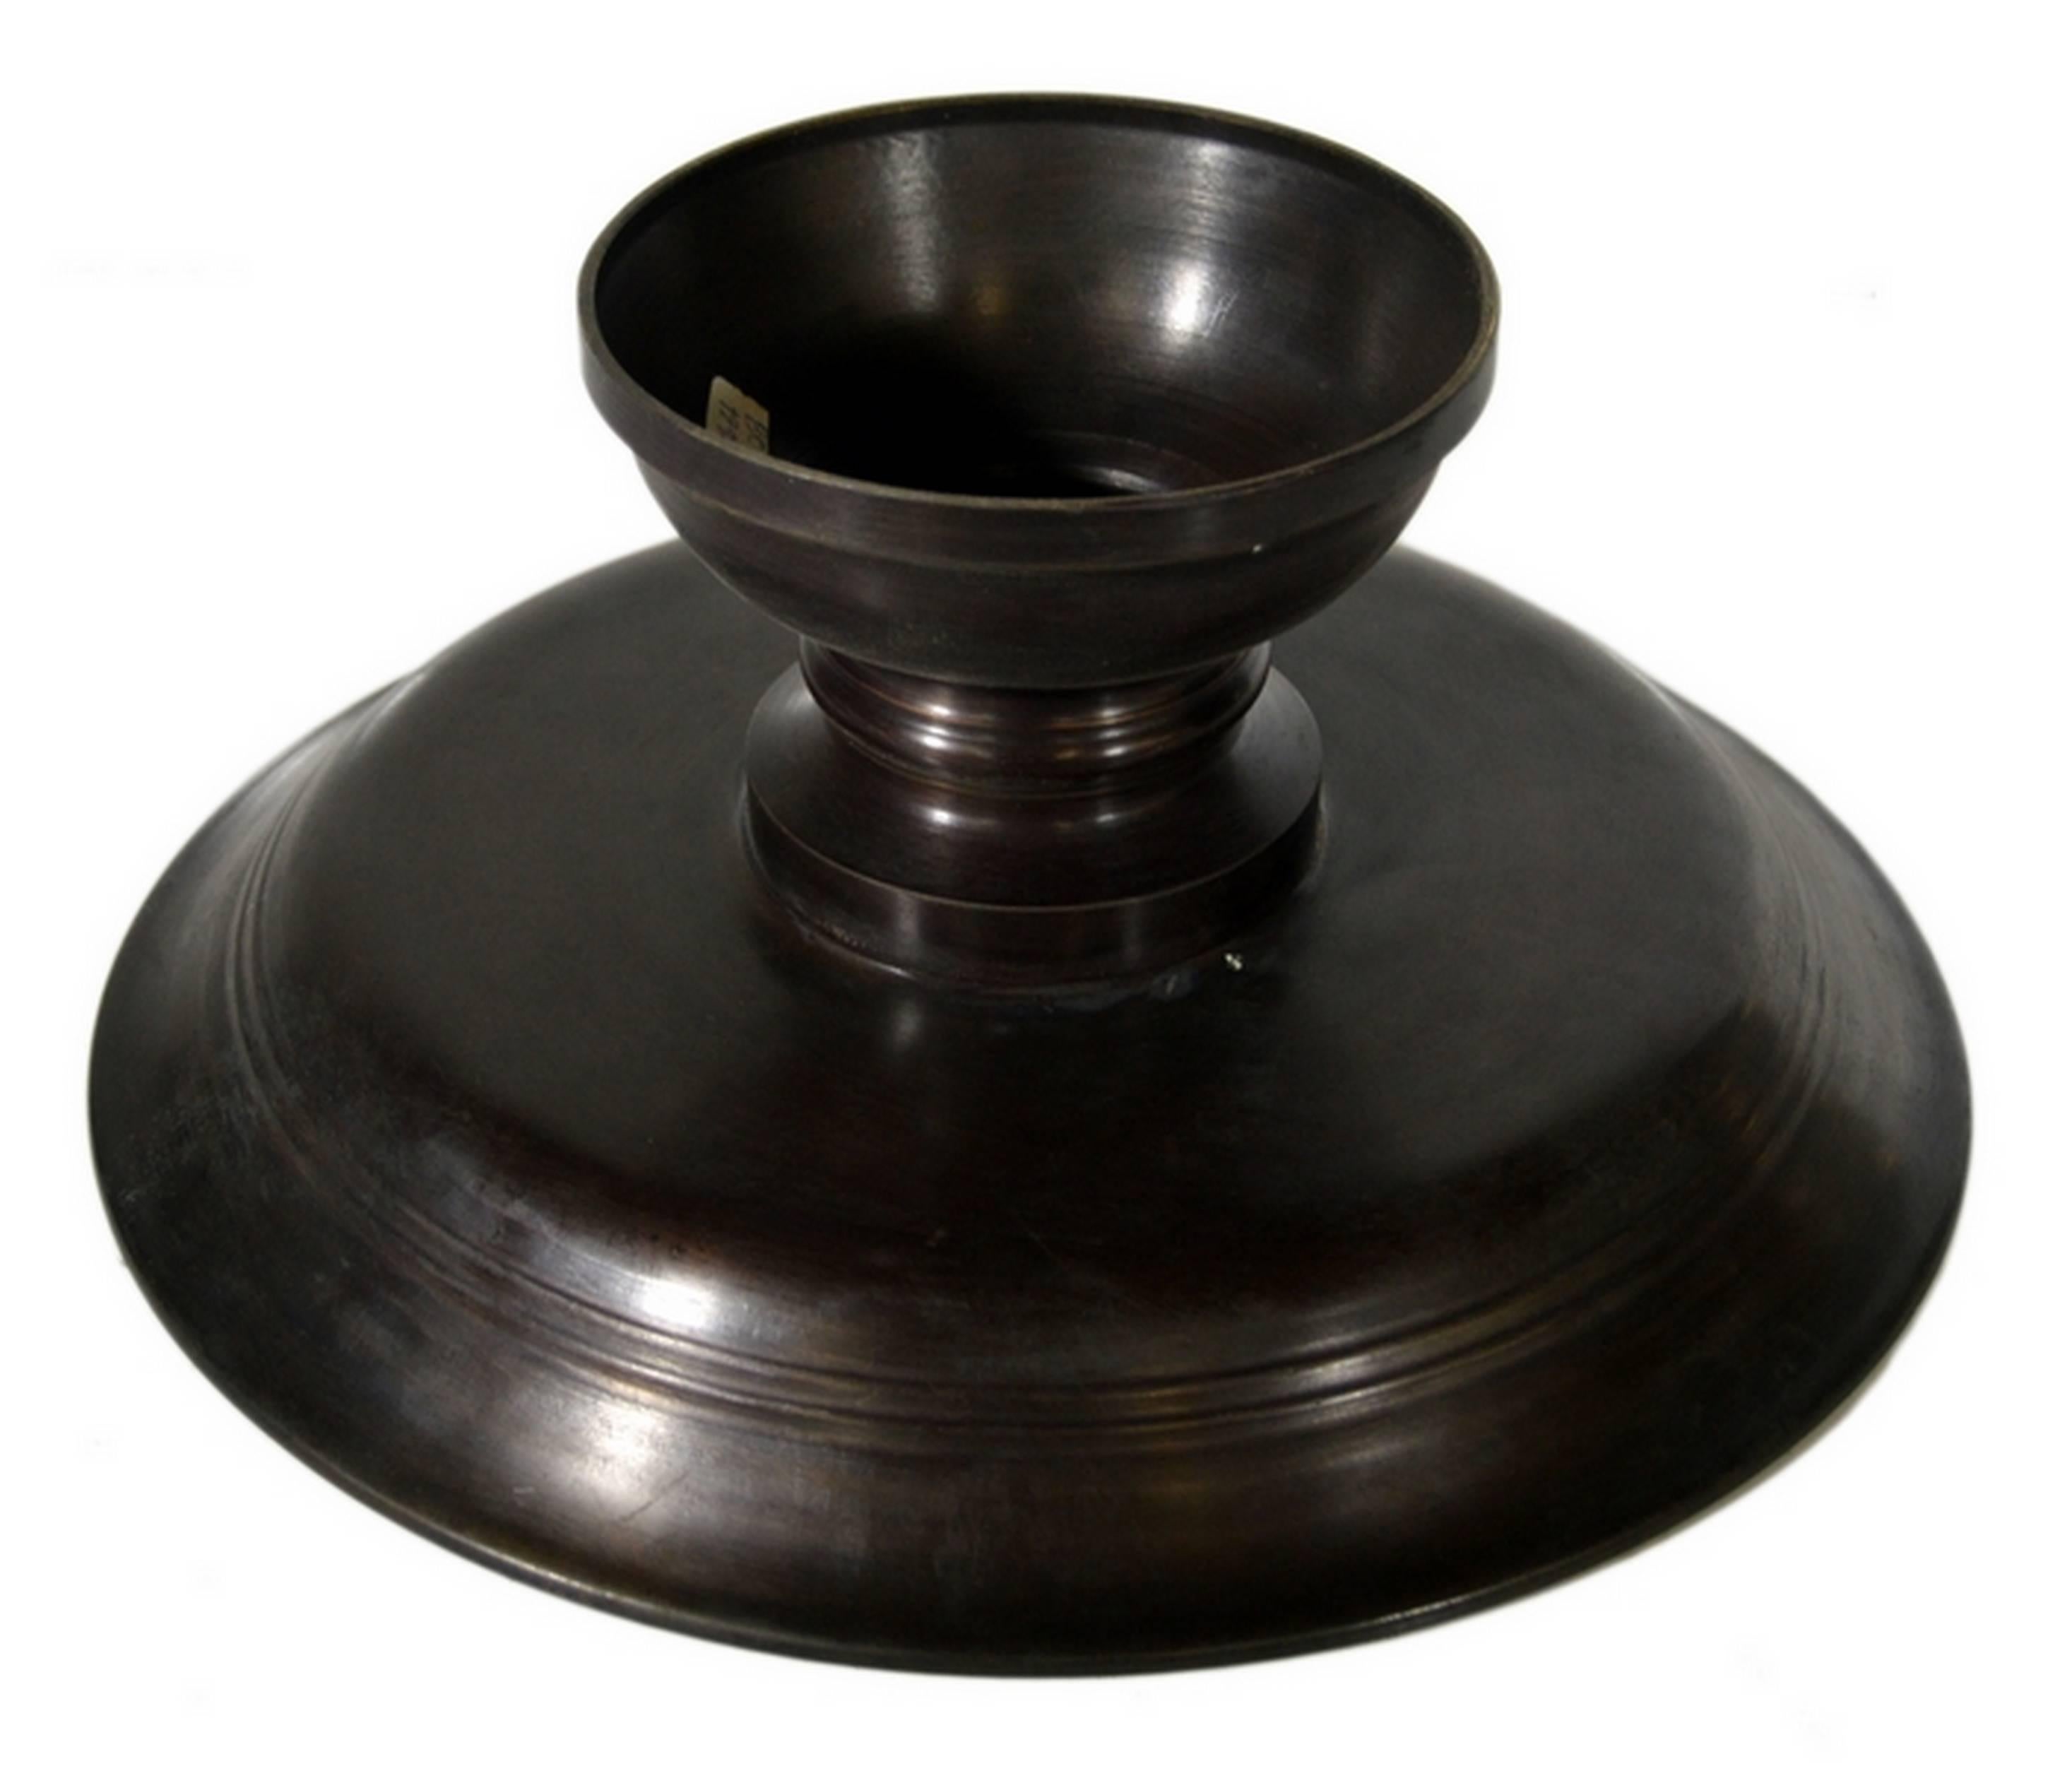 Asian Cylindrical Bronze Cake Stand with Dark Patina from the Late 20th Century